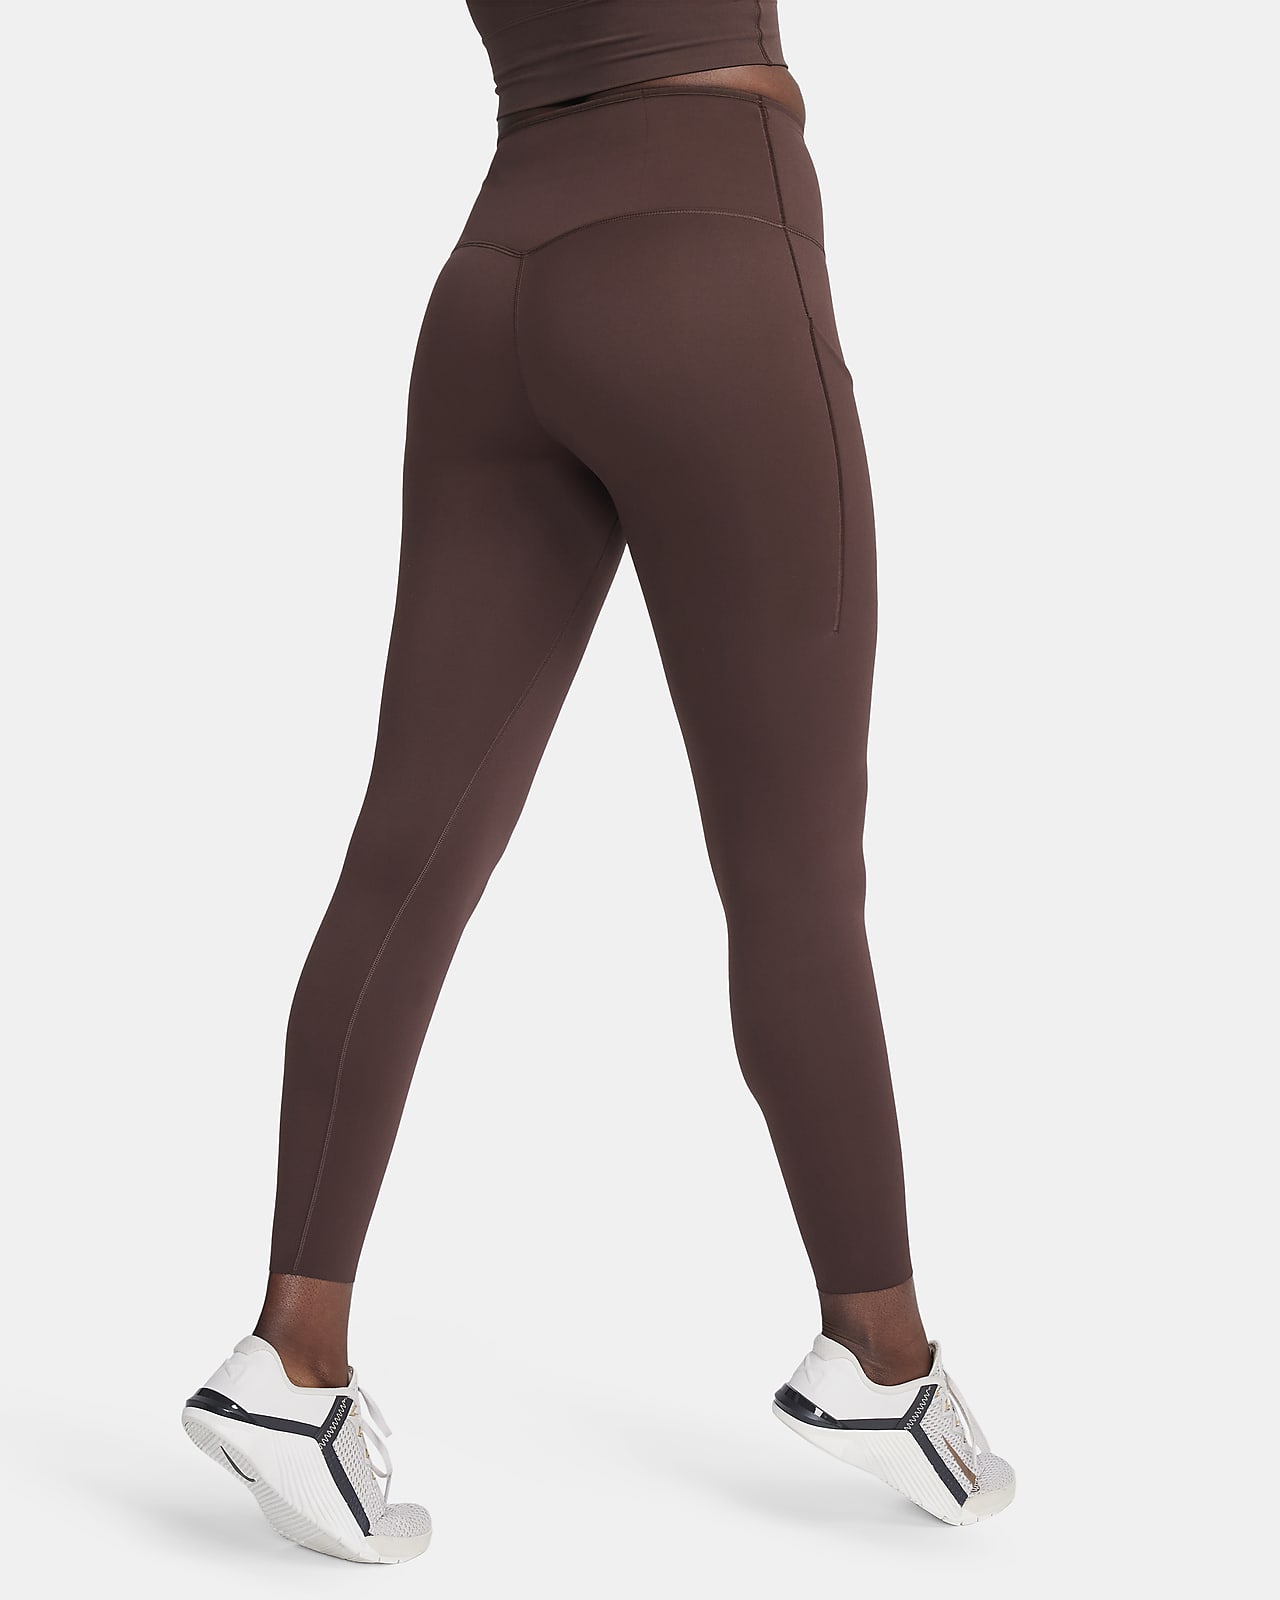 SPORTSWEAR ESSENTIAL WOMENS TIGHTS - Shop Women's Bottoms - Free NZ Wide  Delivery Over $70